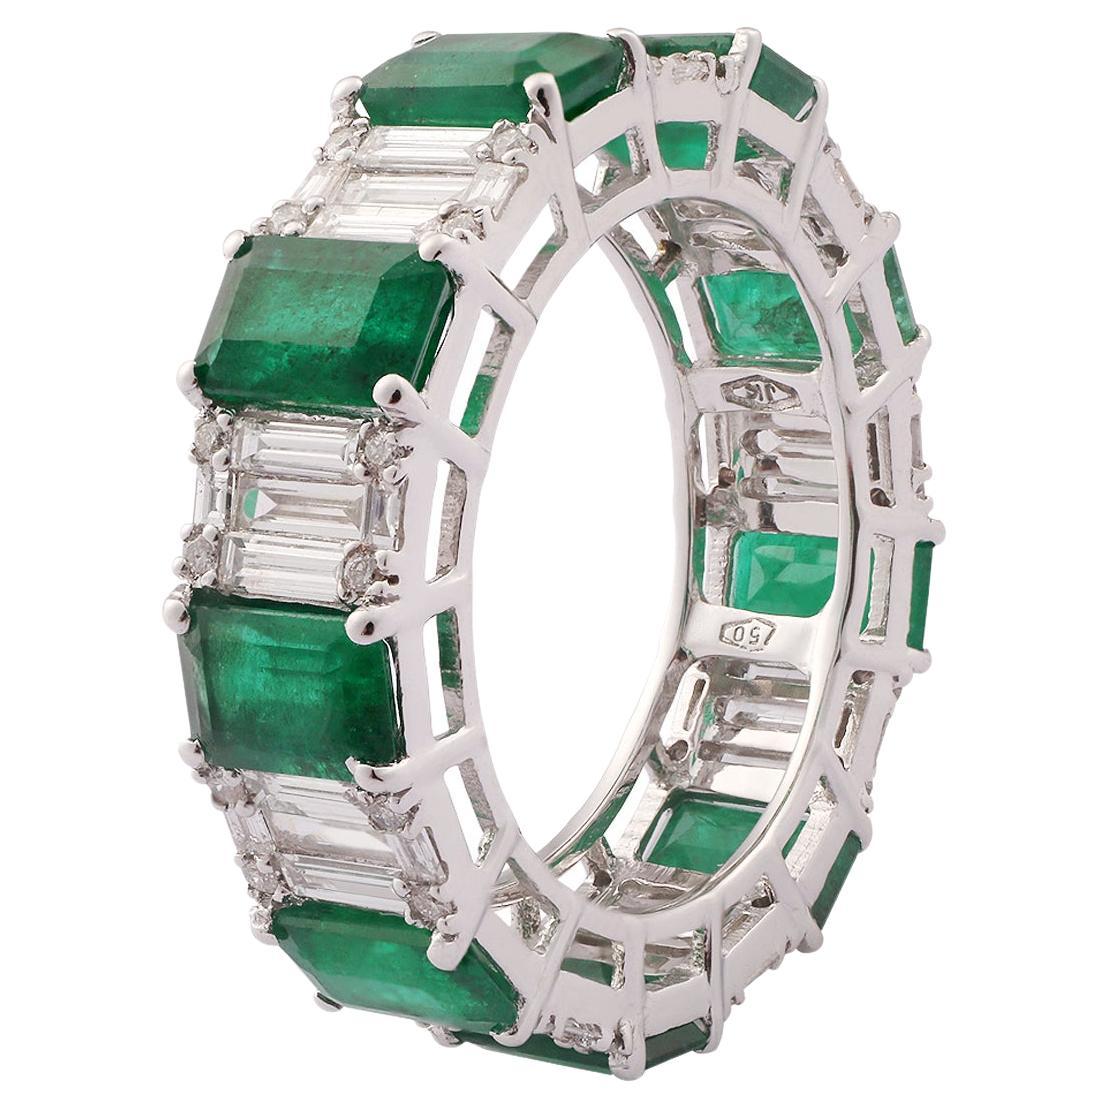 Natural Diamond 1.15cts & Emerald 4.43cts in 18k Gold 3.02gms Ring For Sale